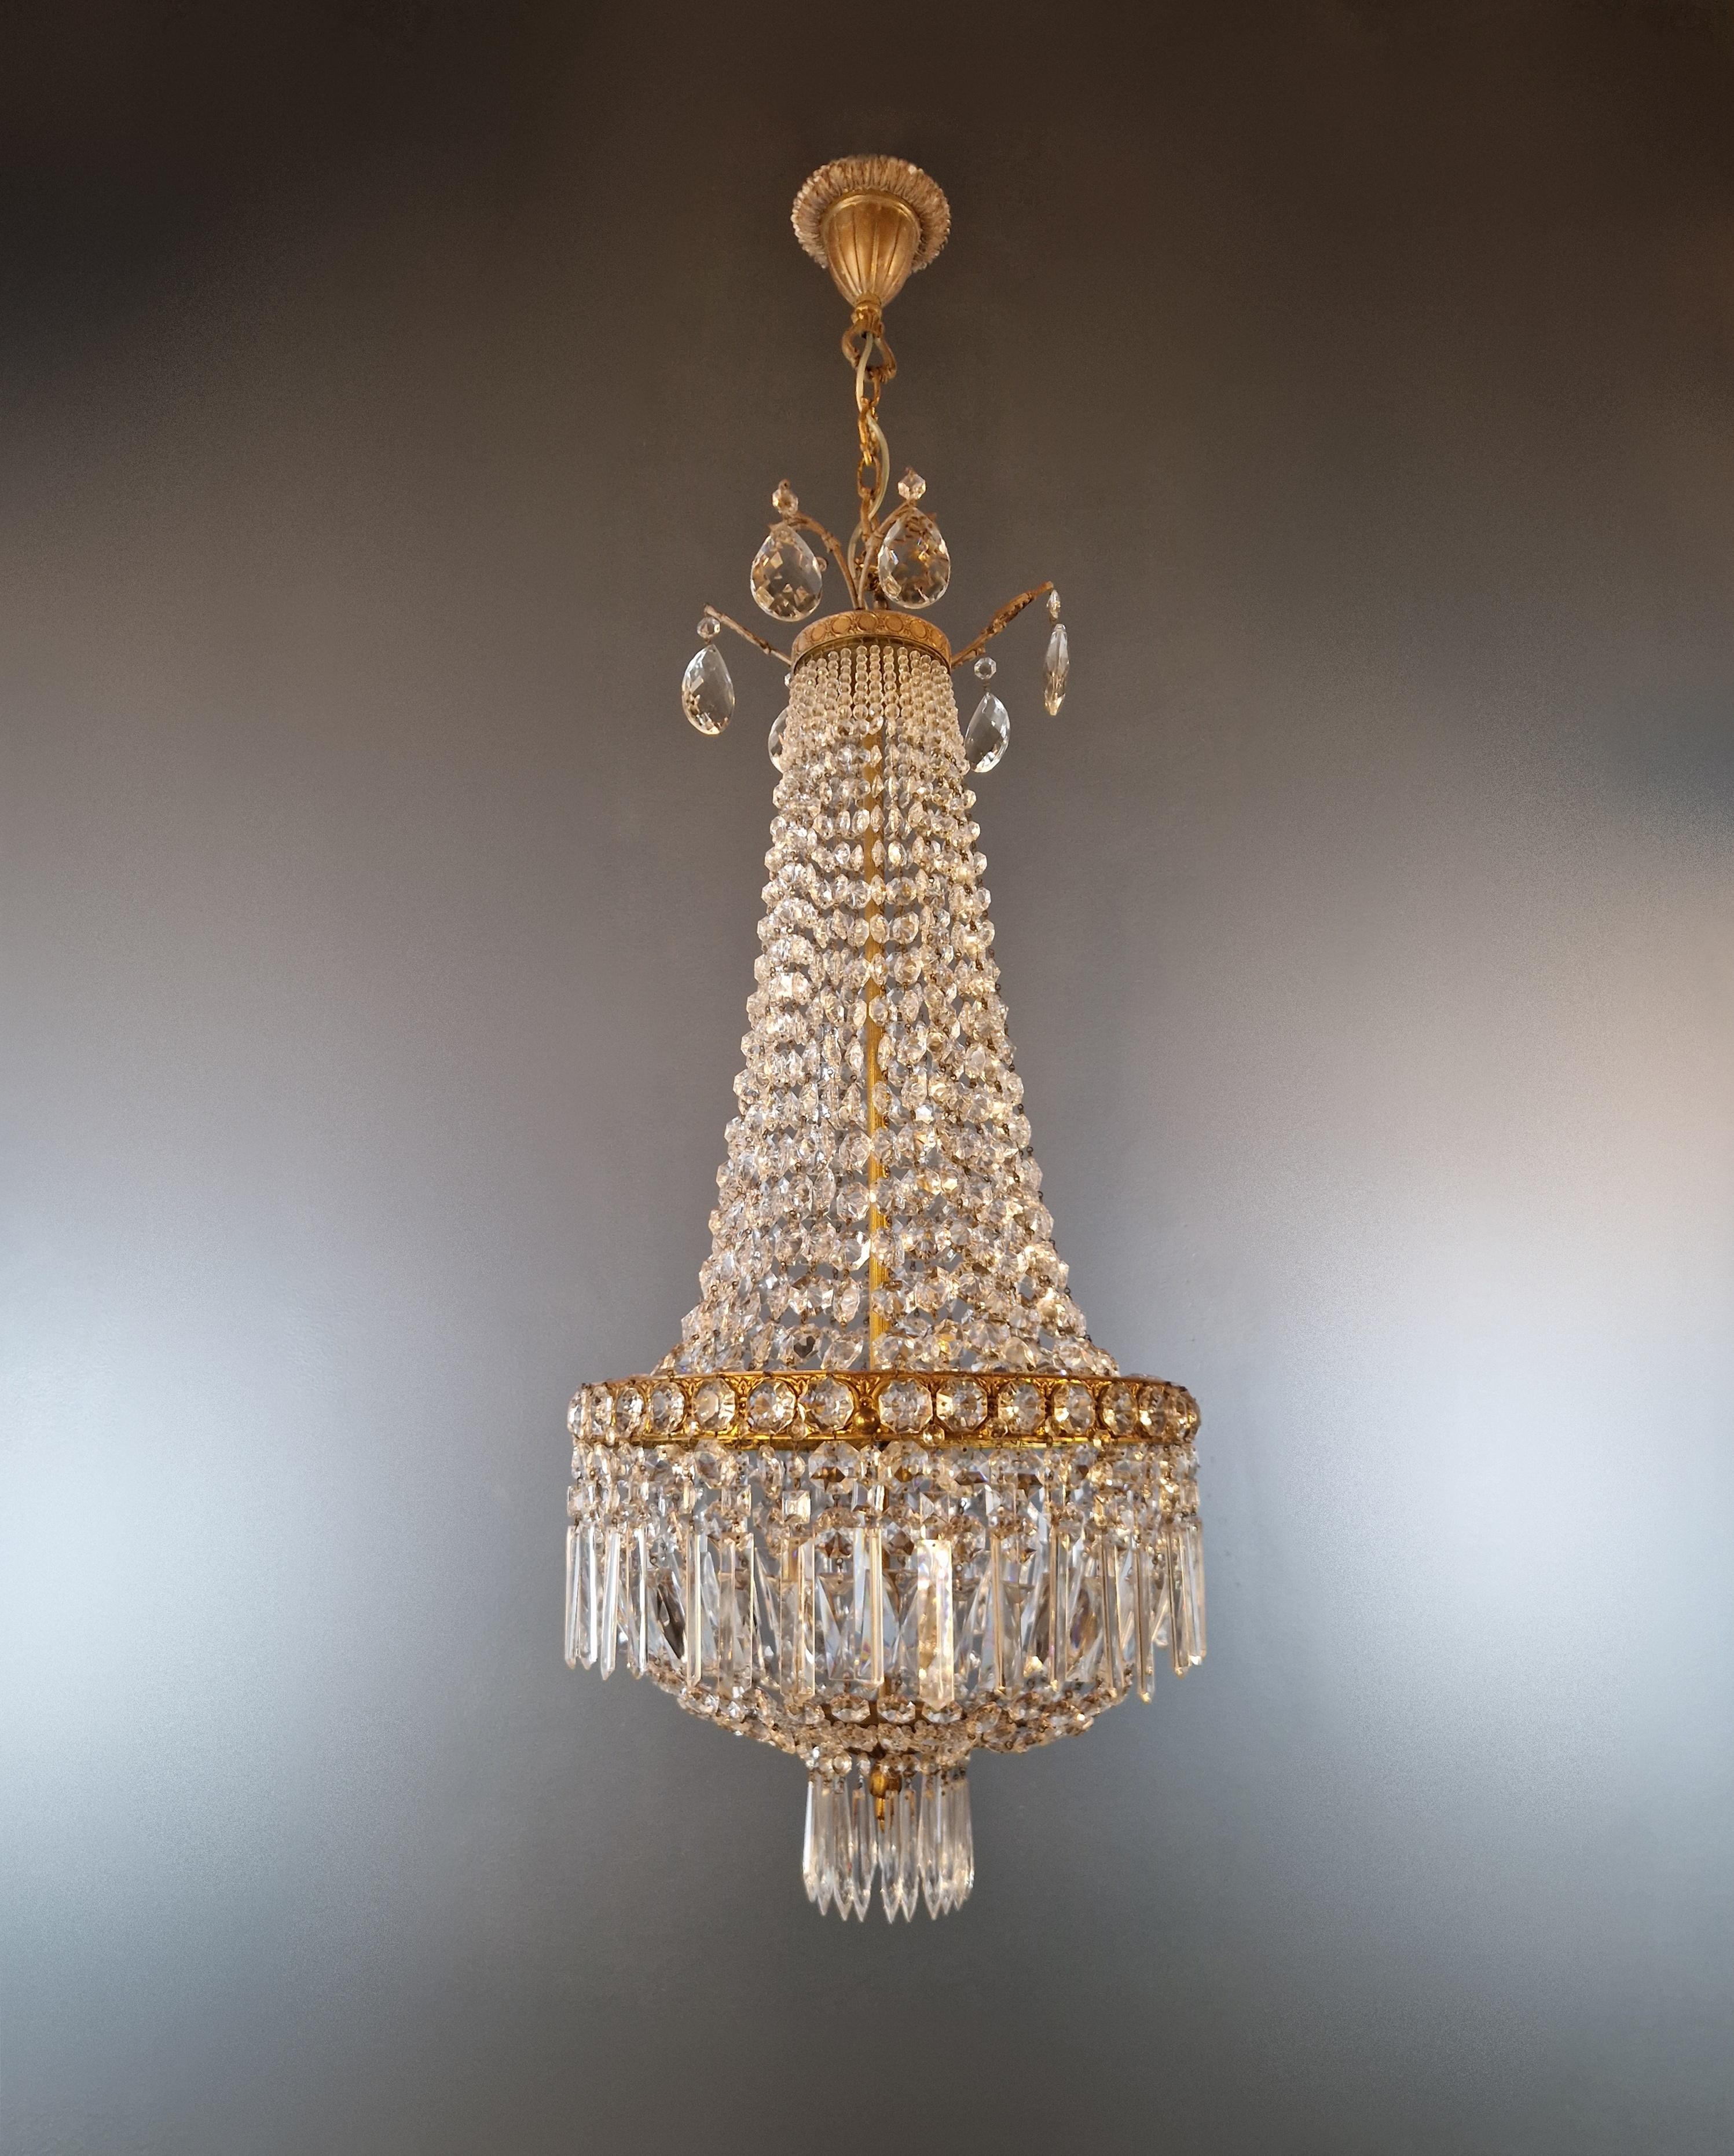 Italian Fine Brass Empire Sac a Pearl Chandelier Crystal Lustre Basket Lamp Antique For Sale